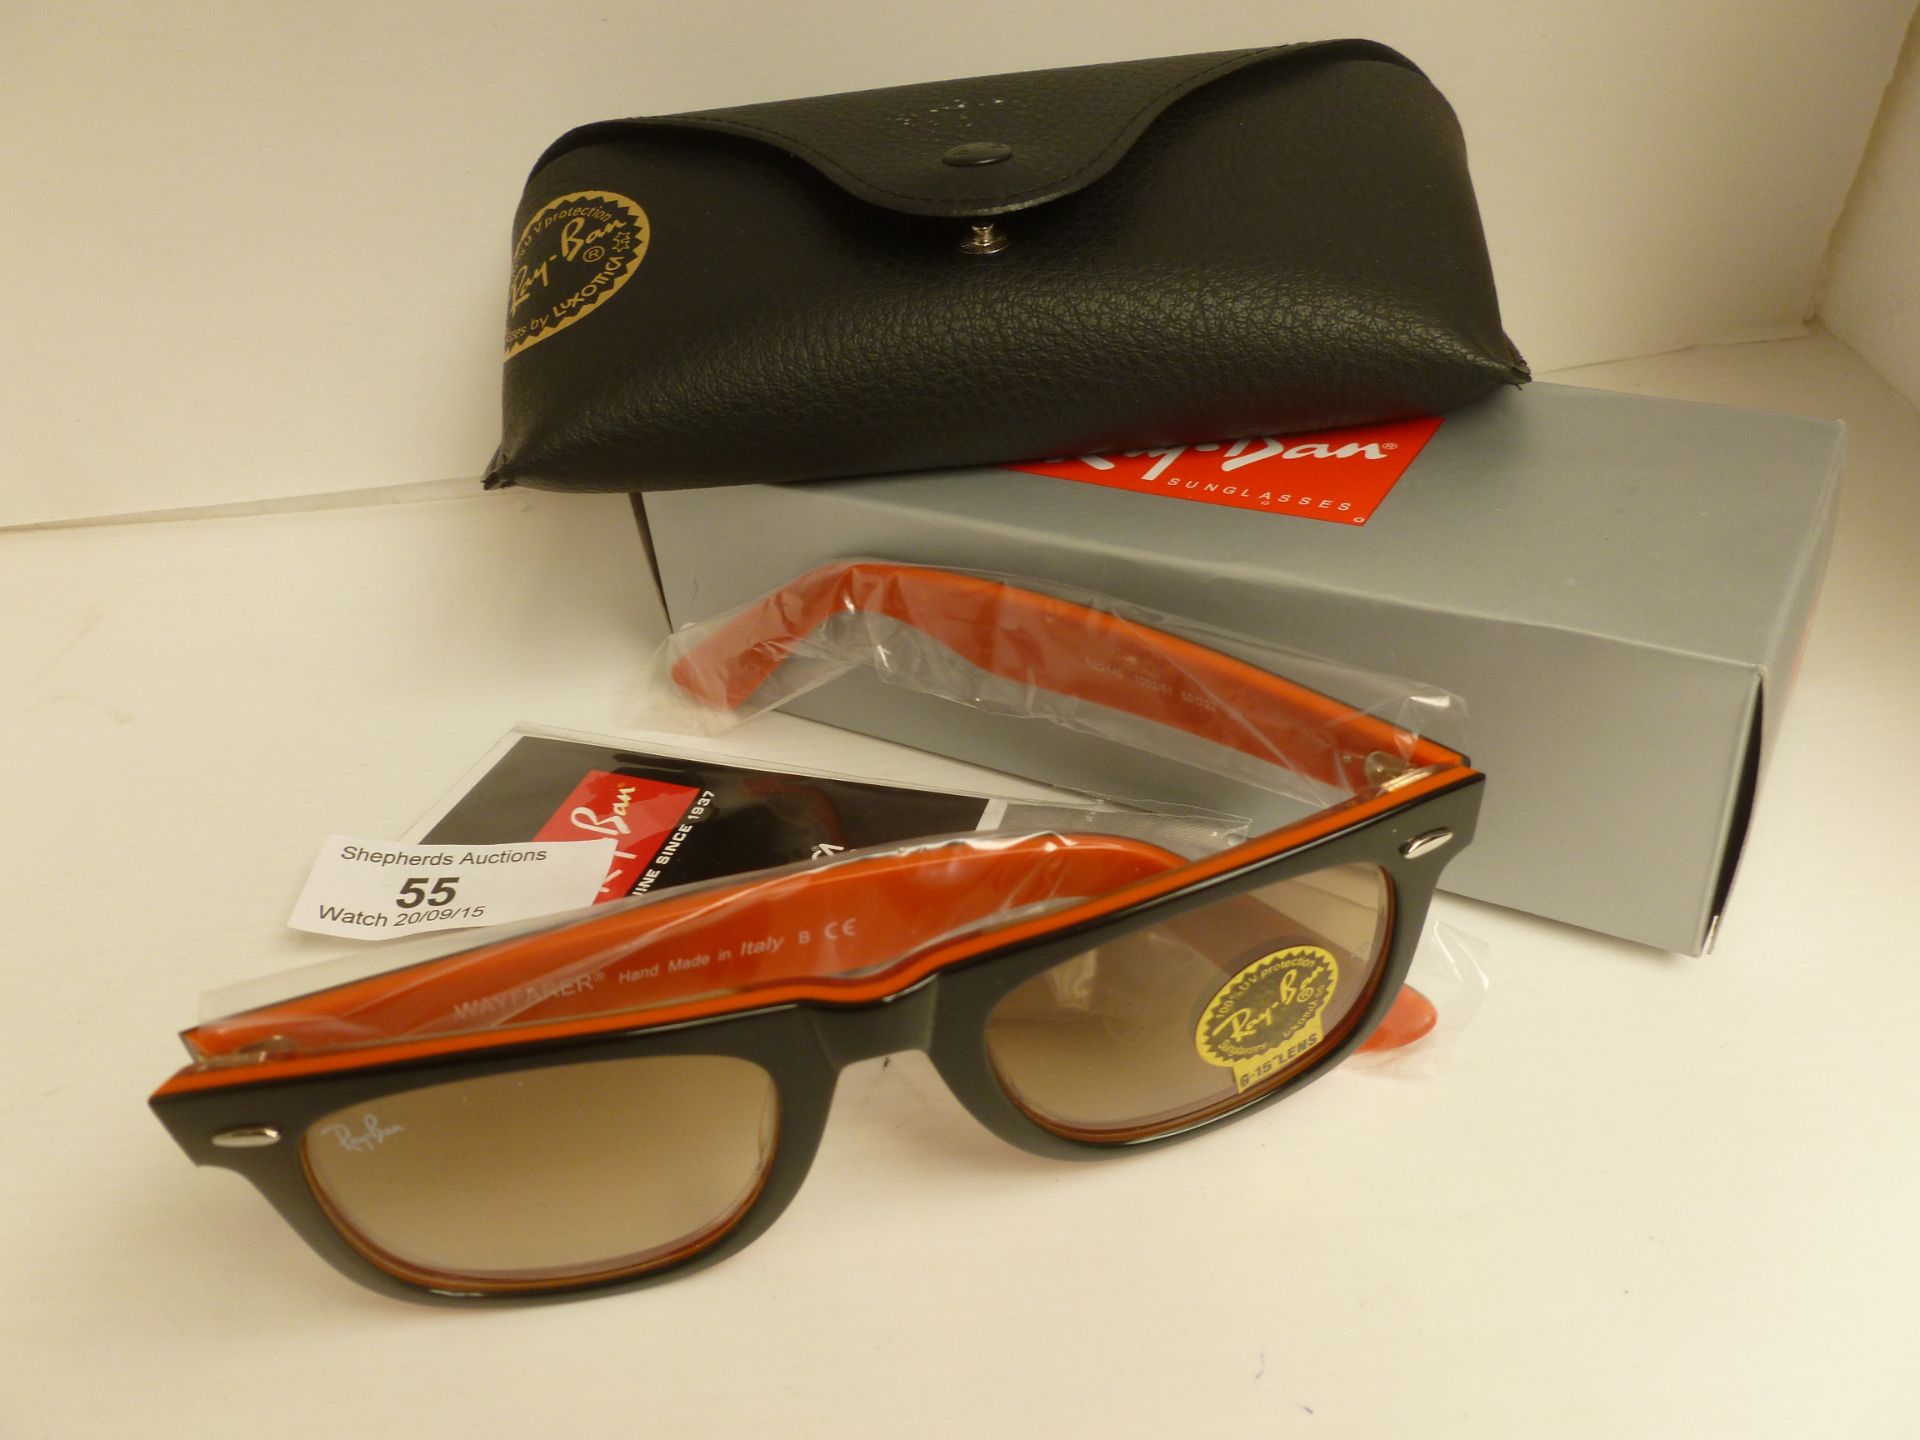 Ray Ban Way Farer Sunglasses with black outer frame & Red inner frame new and boxed with carry